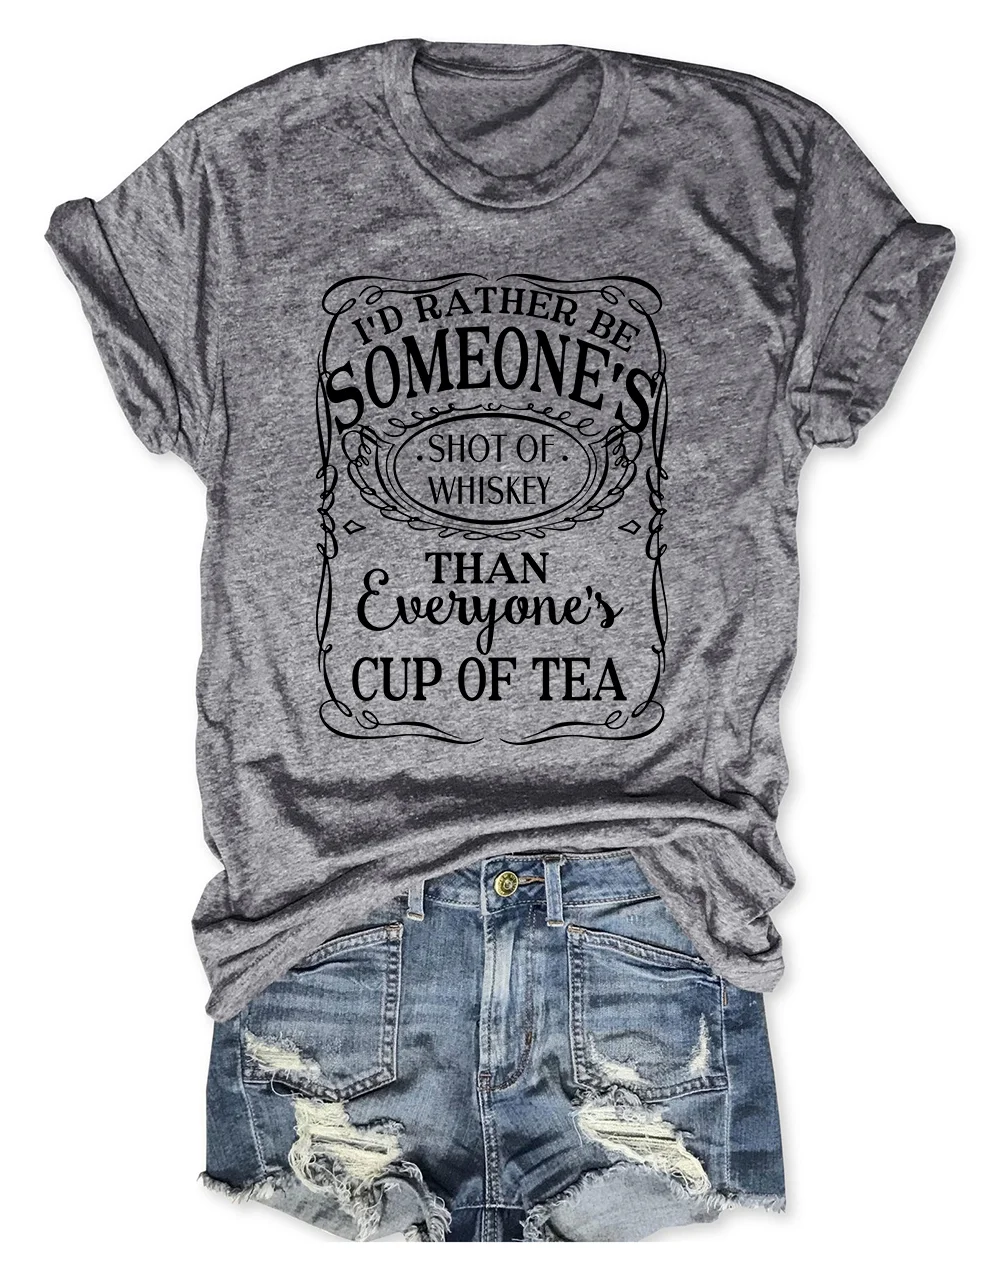 I'd Rather Be Someone's Shot Of Whiskey Than Everyone's Cup Of Tea T-Shirt